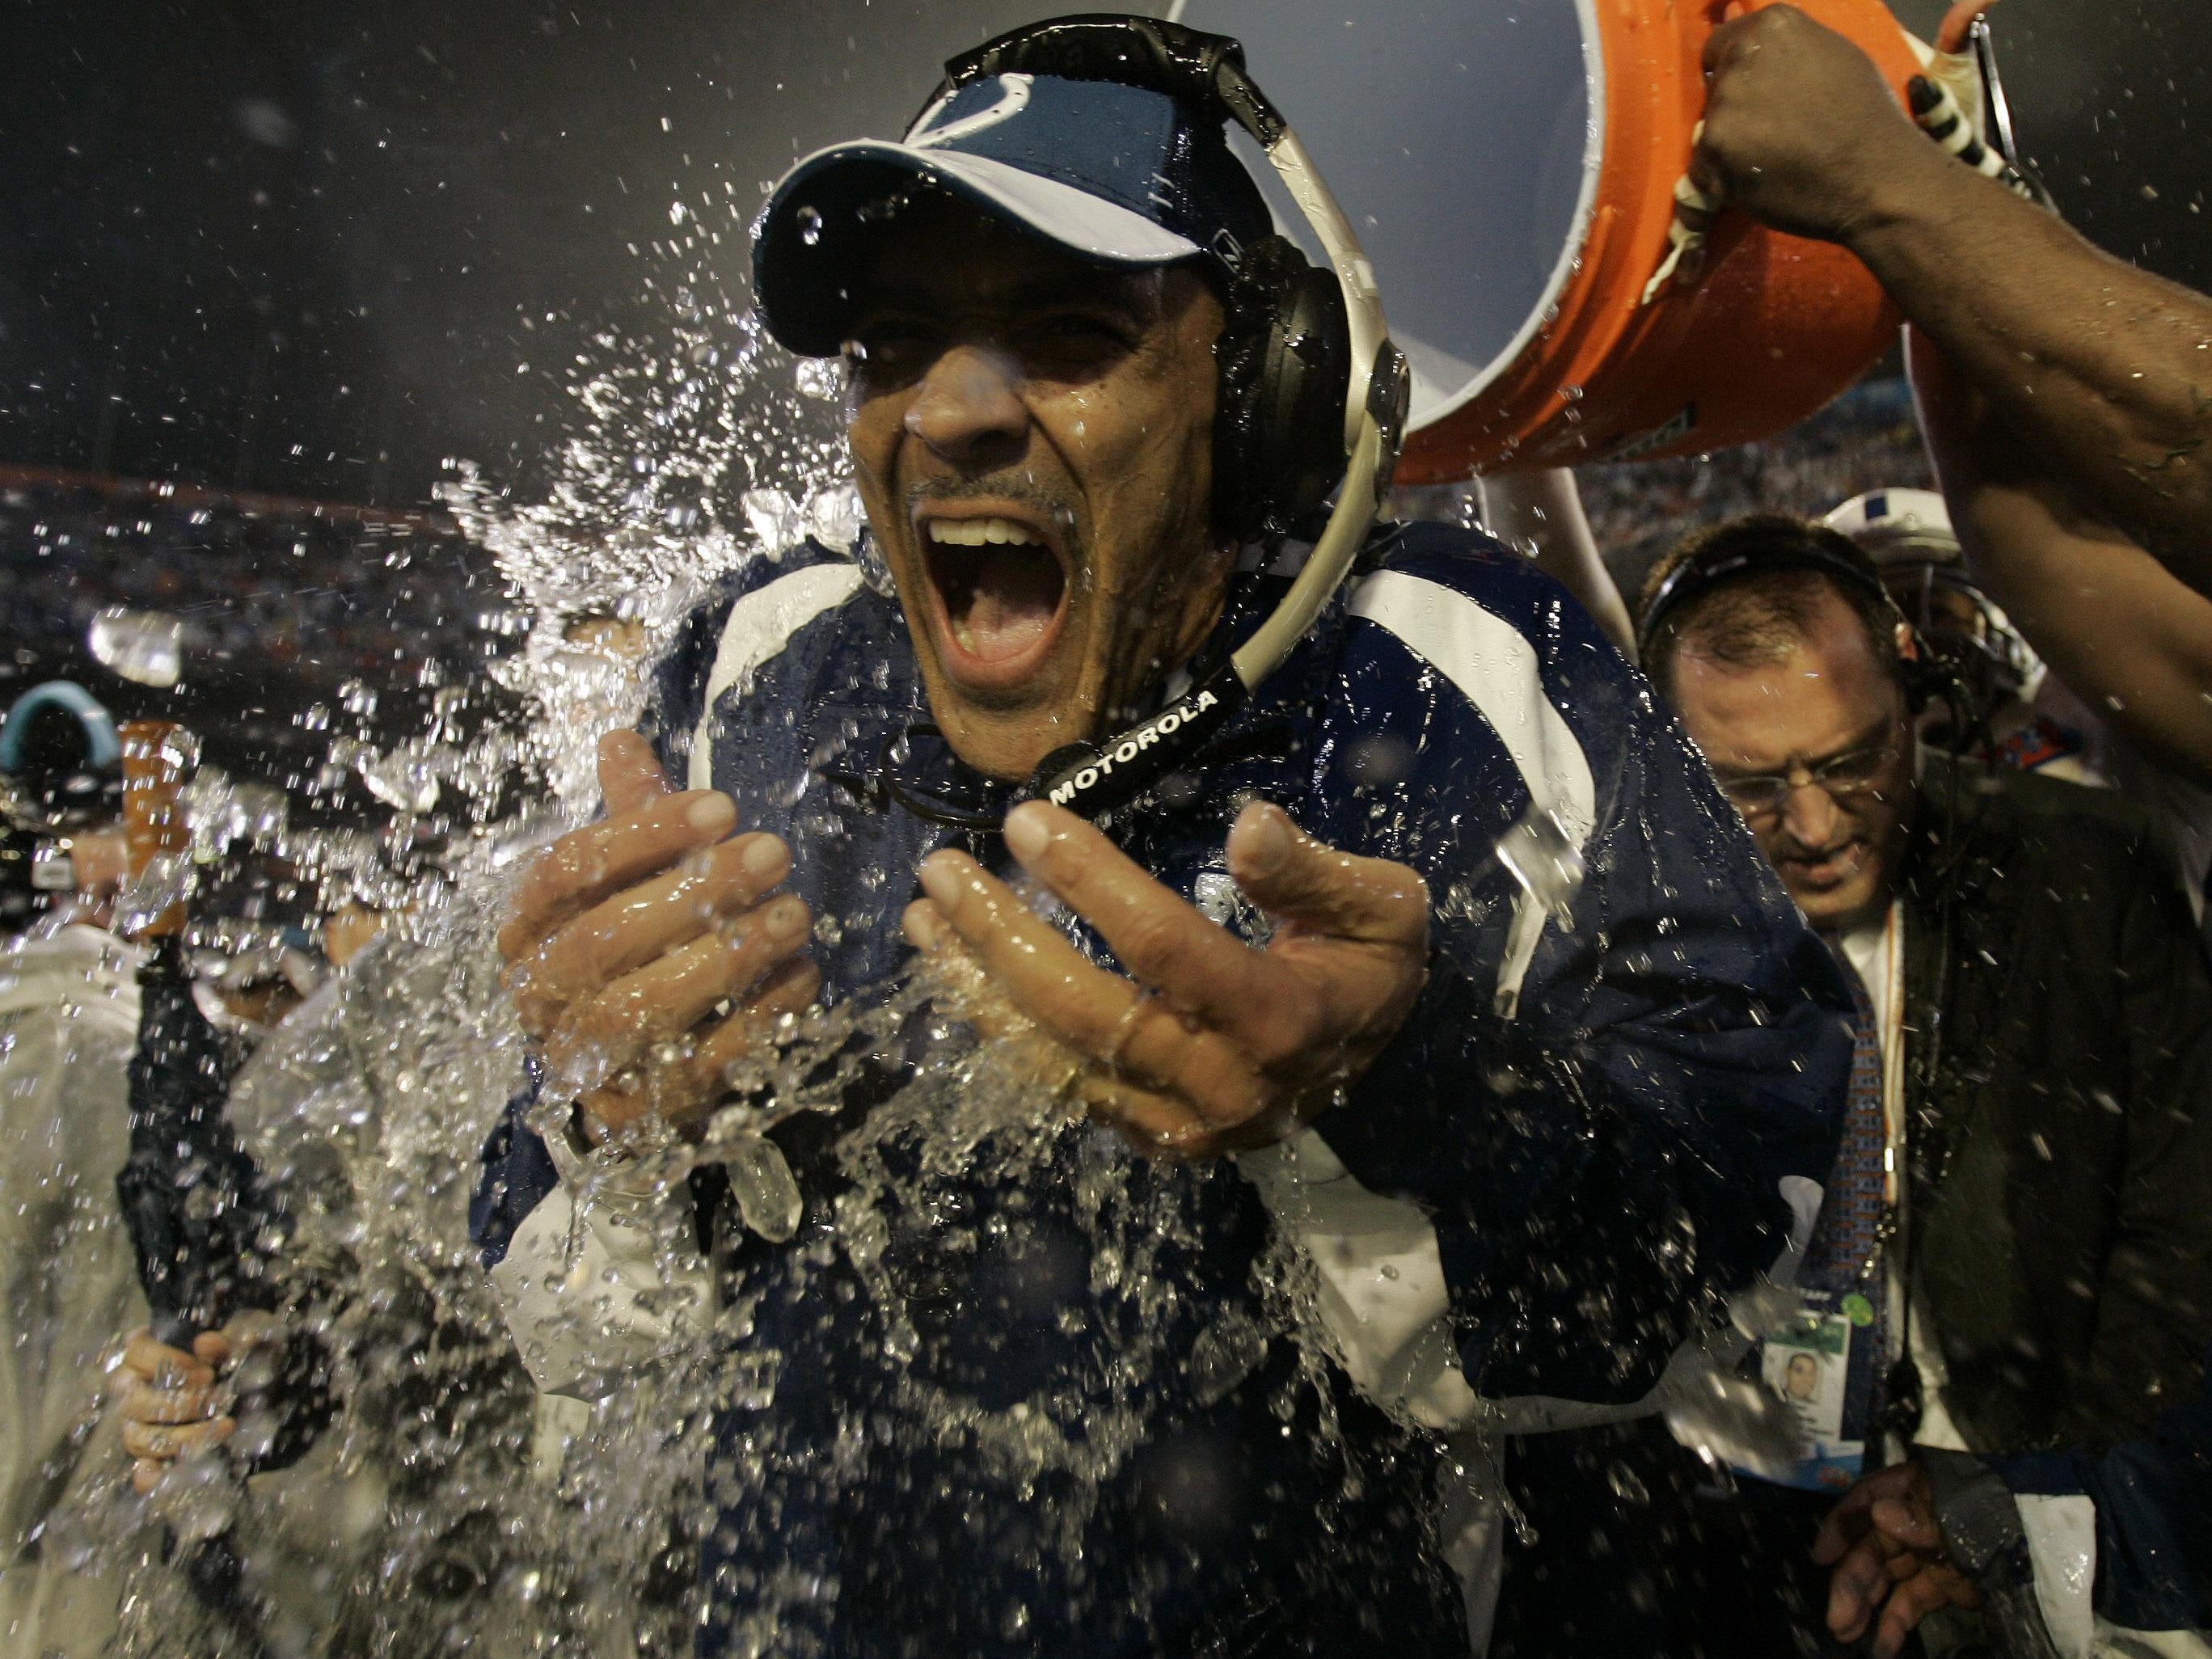 Tony Dungy is showered after the Indianapolis Colts team he coached won the Super Bowl, 29-17, over the Chicago Bears on Feb. 4, 2007.